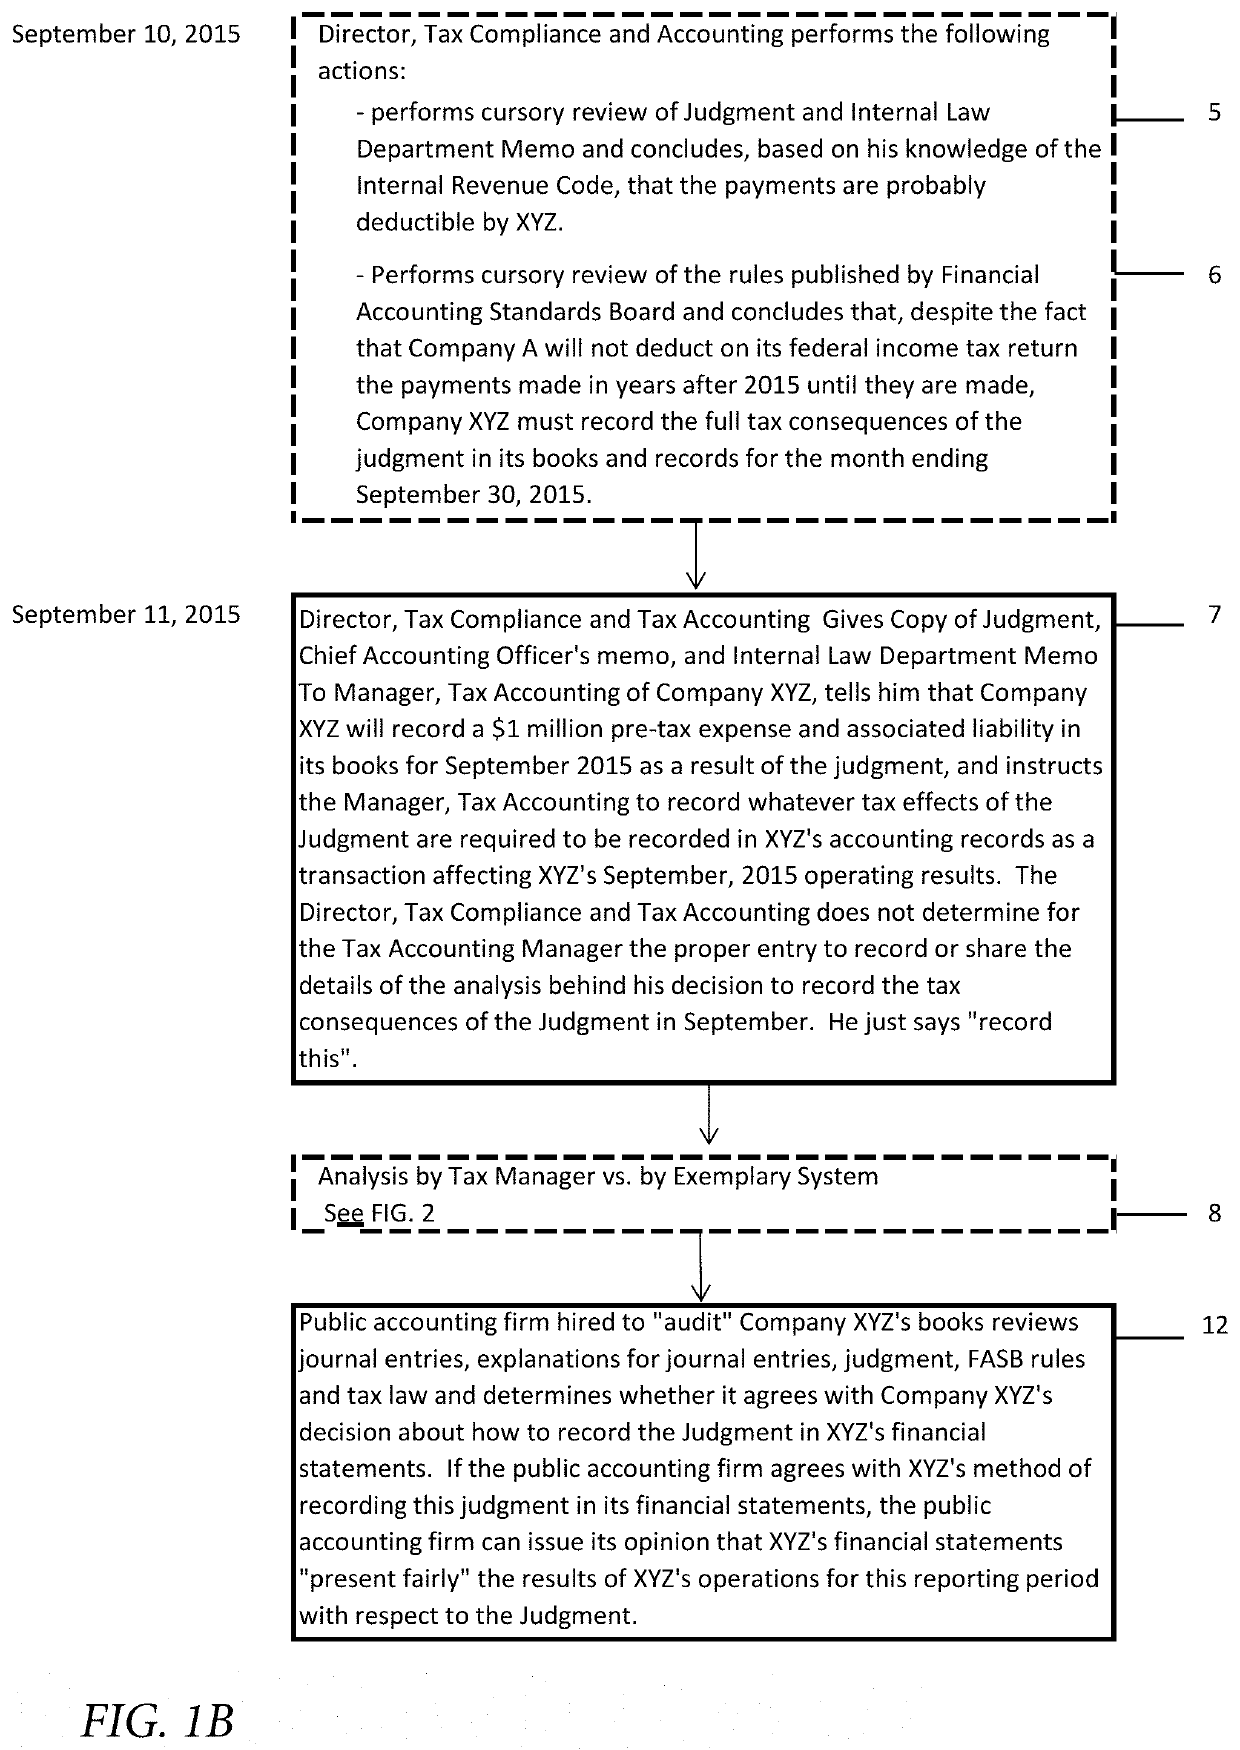 Determining correct answers to tax and accounting issues arising from business transactions and generating accounting entries to record those transactions using a computerized predicate logic implementation